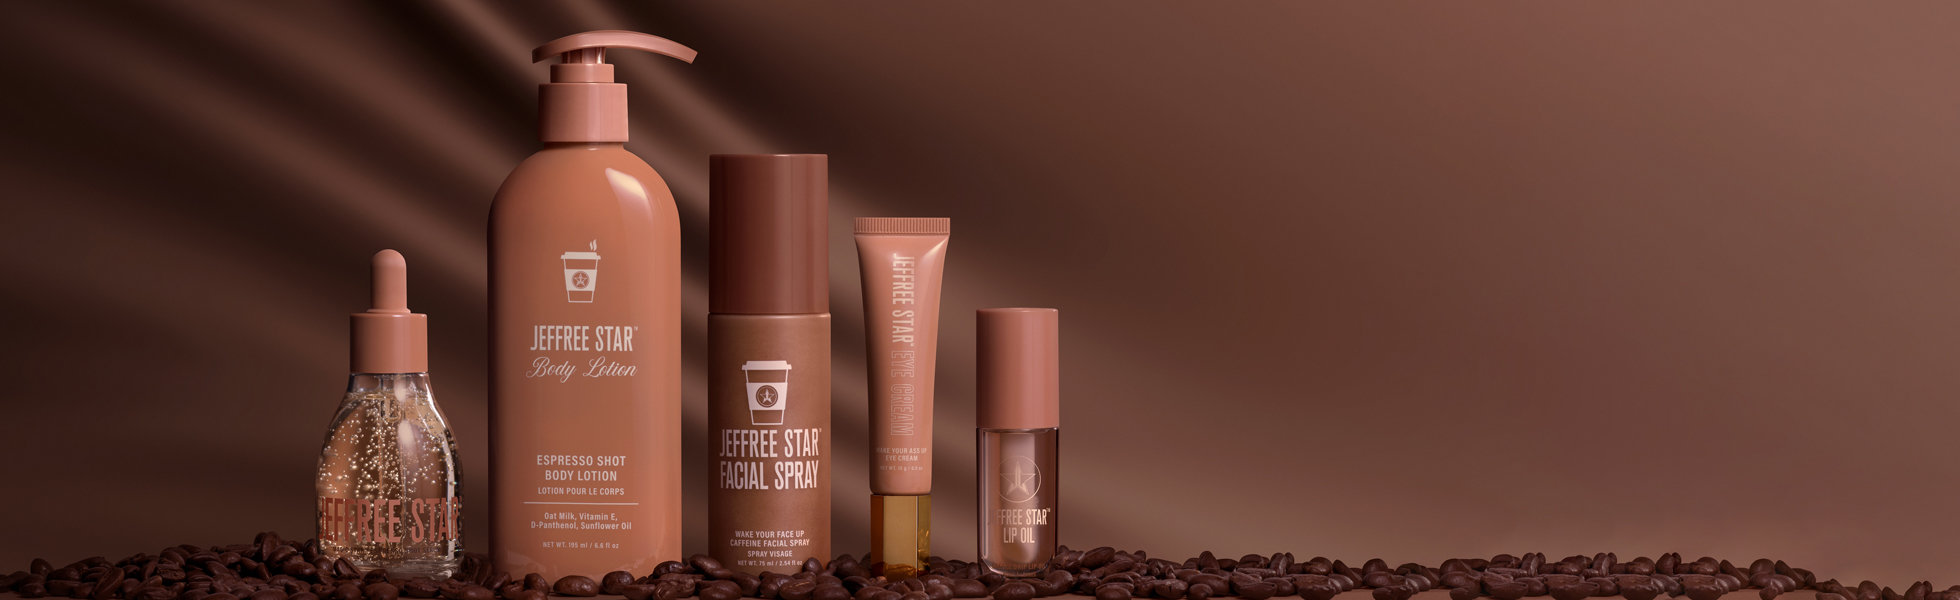 Shop the Jeffree Star Cosmetics Wake Your Ass Up Collection